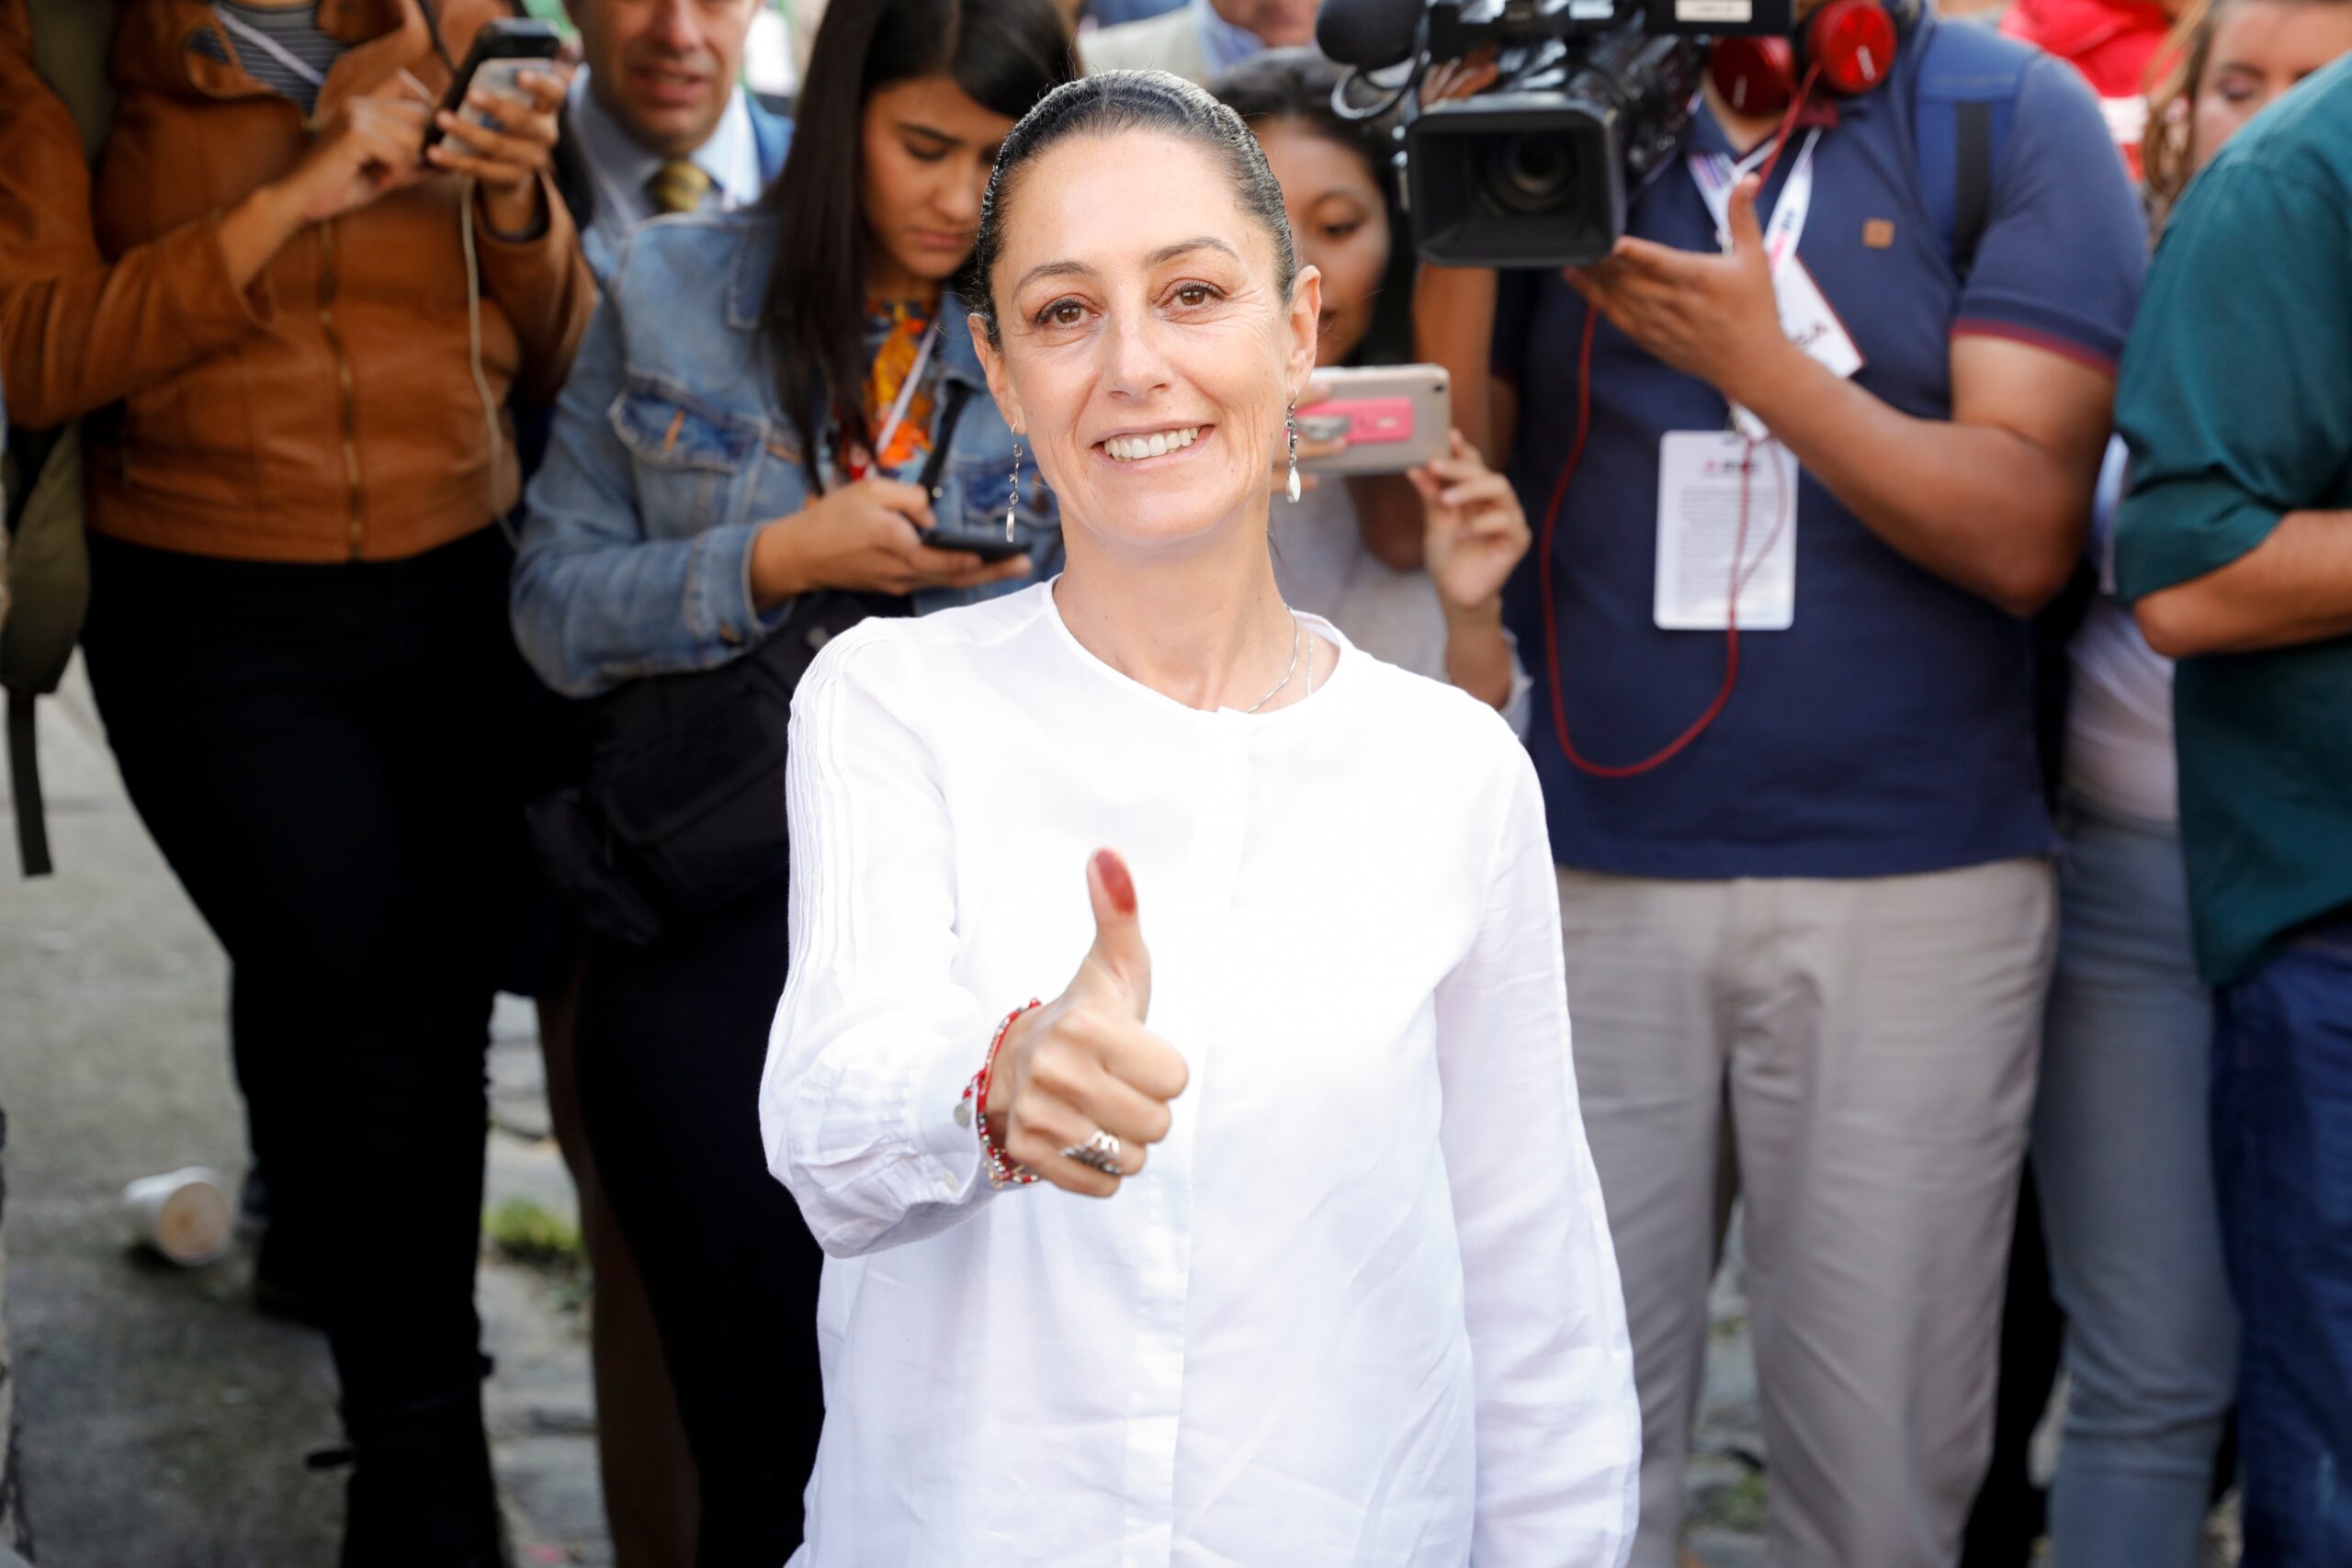 Claudia Sheinbaum Pardo, a Latinx woman in a white dress, gives a thumbs up to the camera, showing the ink on her thumb. Photojournalists crowd behind her with their cameras.